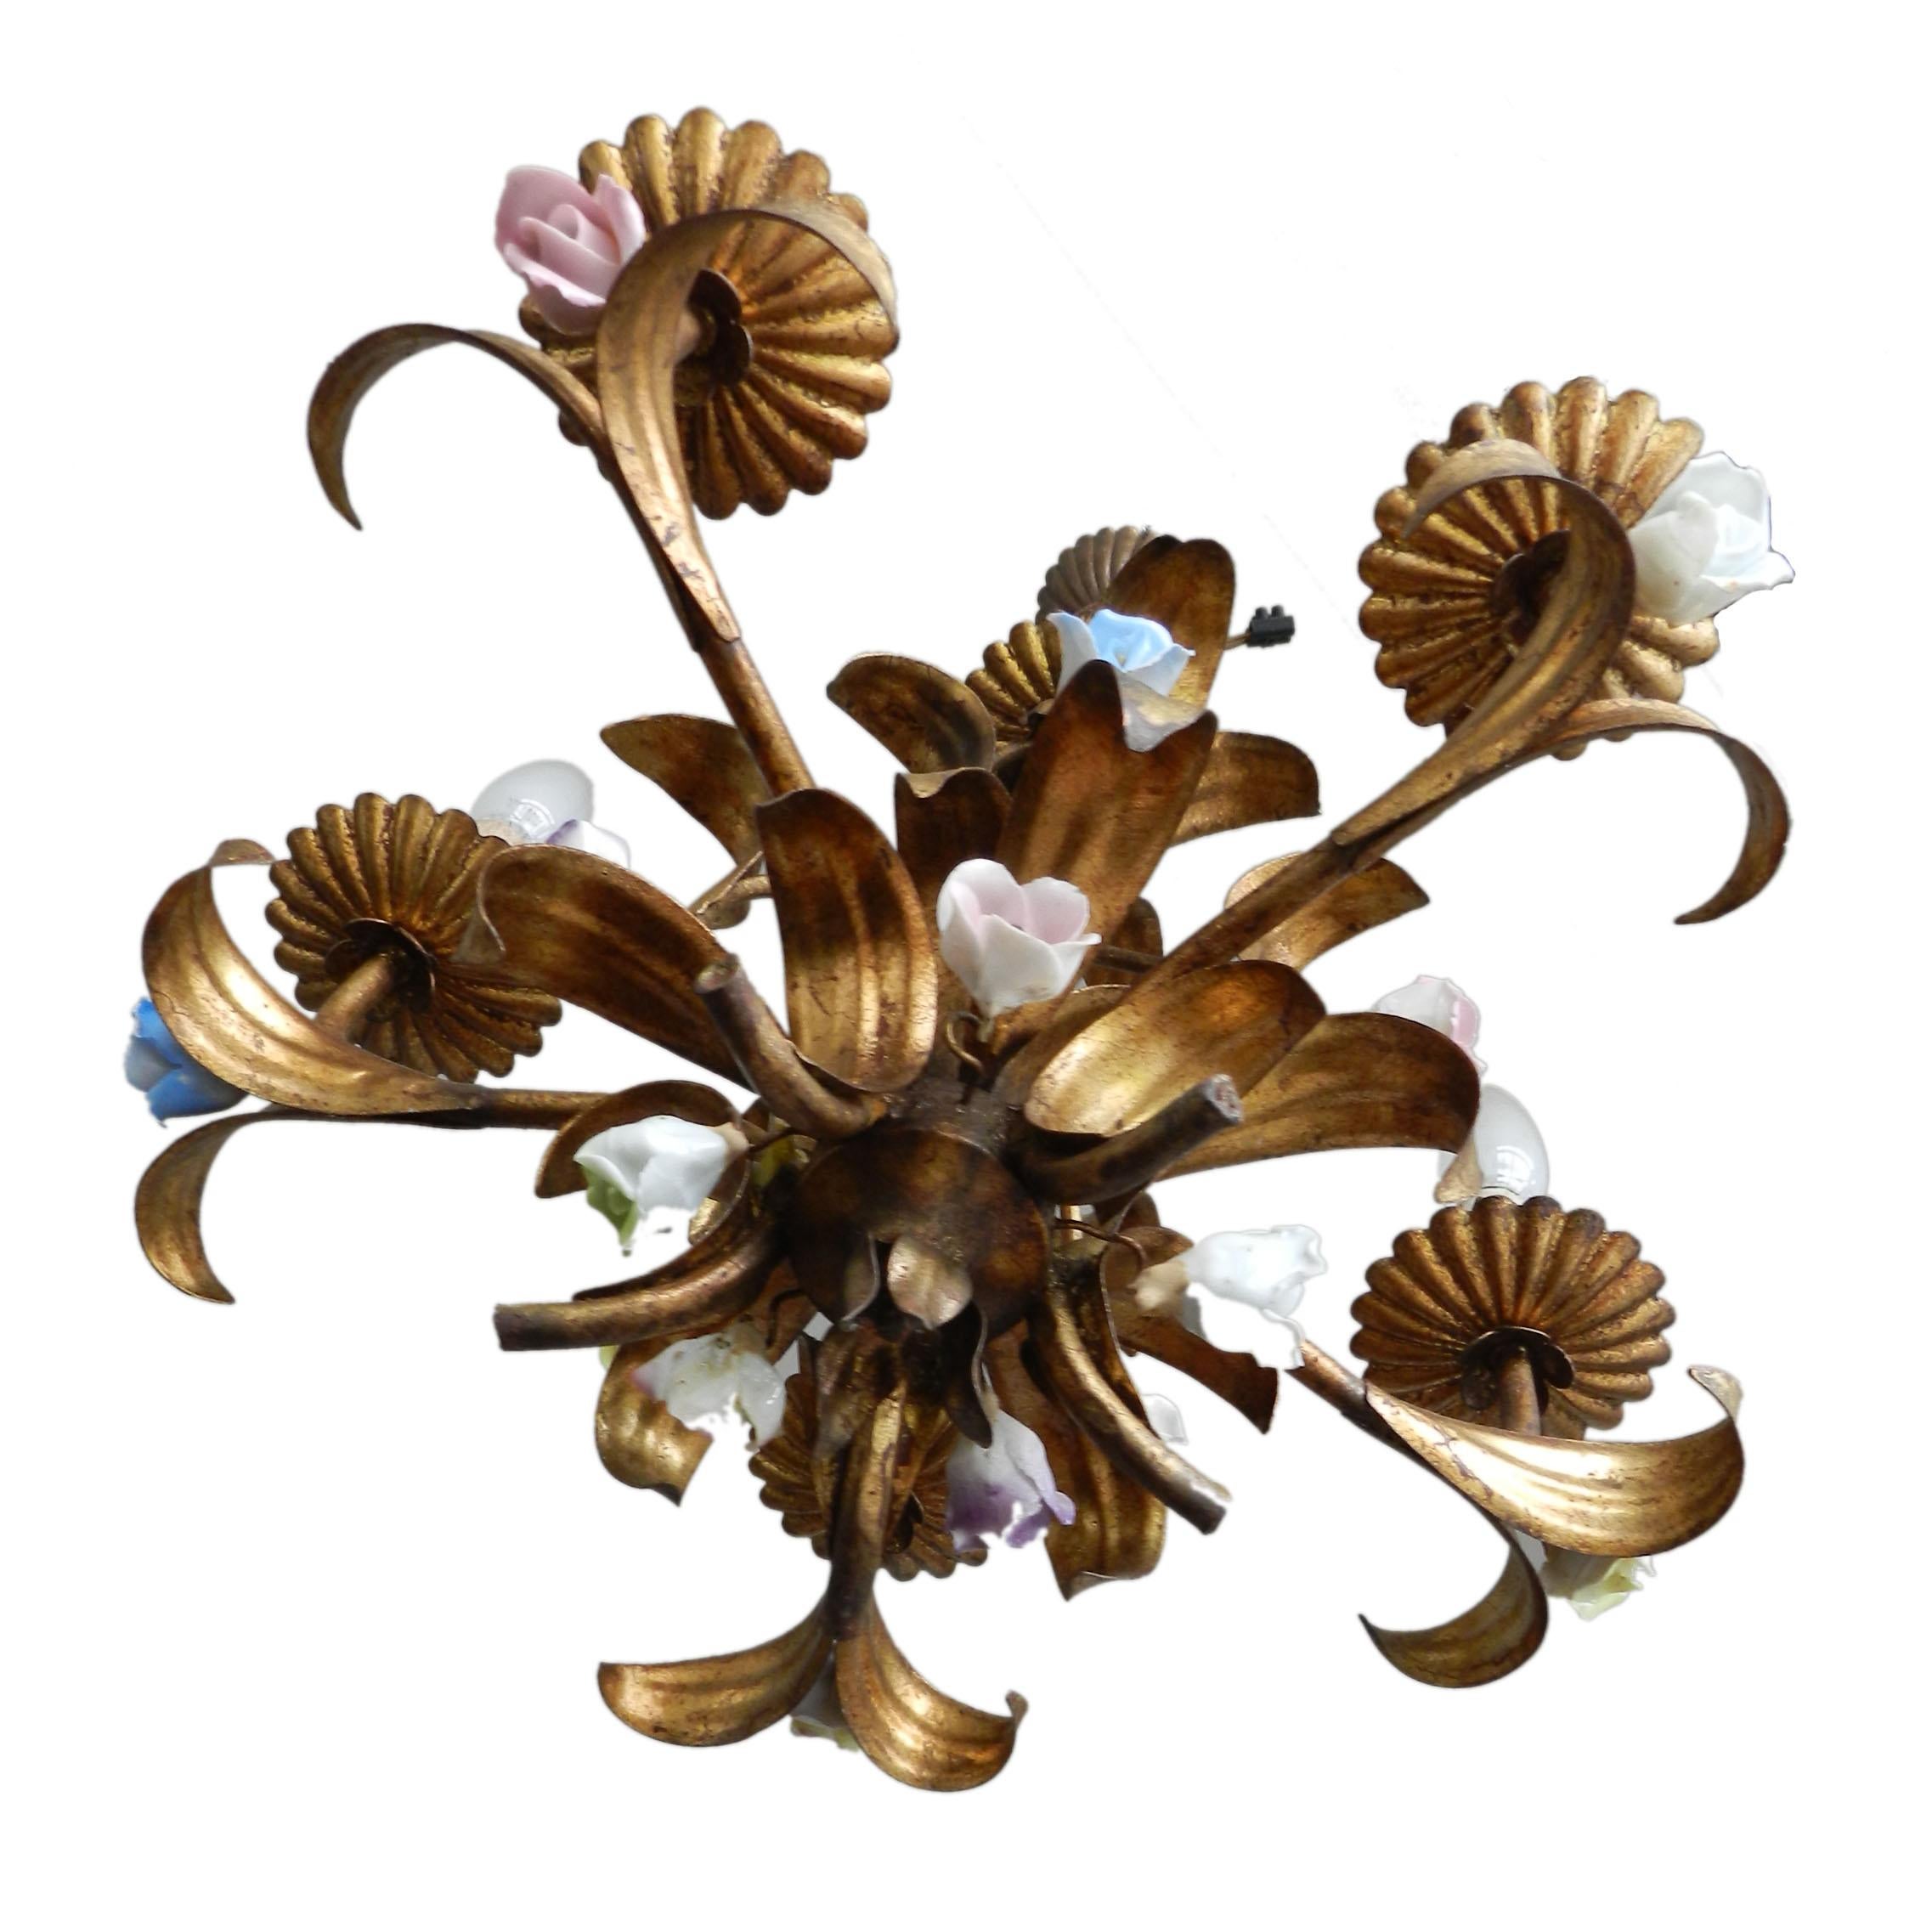 French Mid-Century toleware chandelier circa 1950
Gilded toleware five-light cage chandelier
It has small porcelain flowers interspersed in different colors
Drop 64 cm can be lengthened to give a longer drop if required please ask
In good